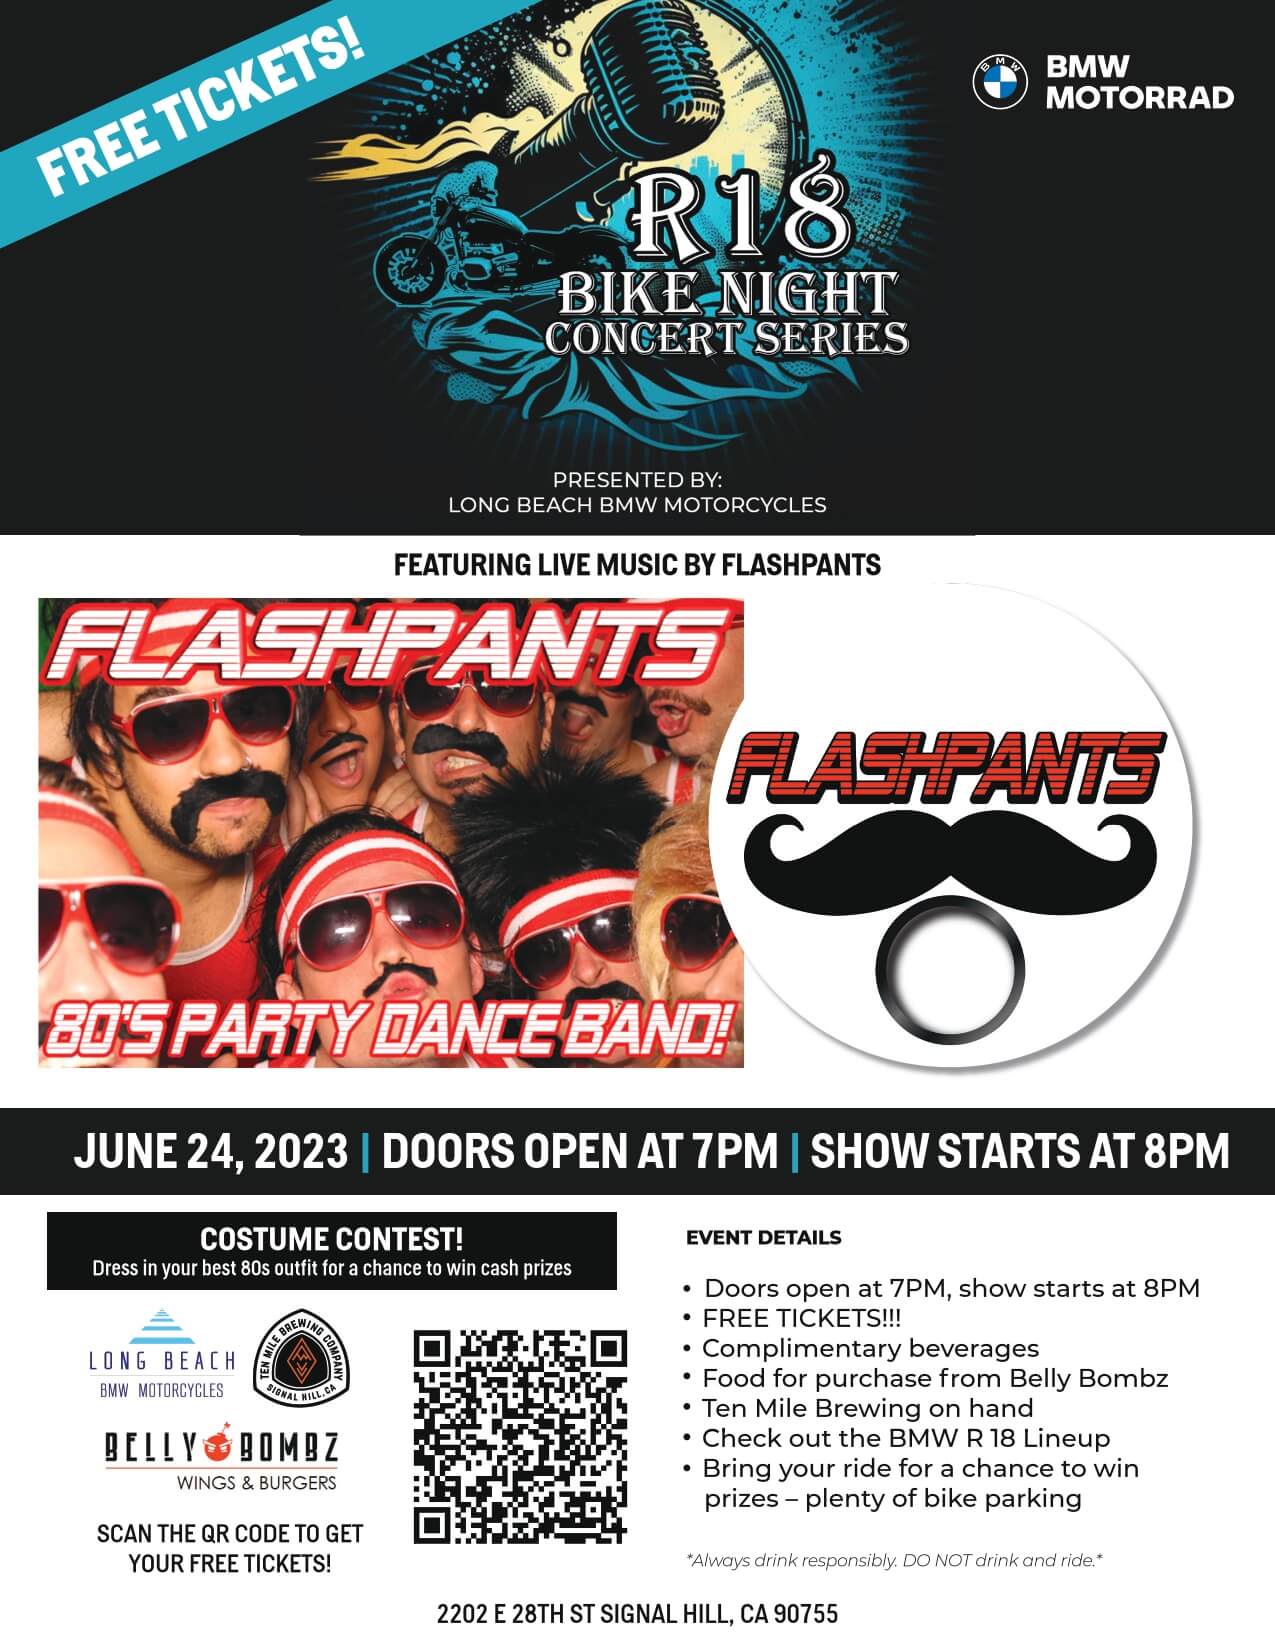 Free Tickets! BMW Motorrad R18 Bike Night Concert Series presented by Long Beach BMW Motorcycles Featuring Live Music by Flashpants